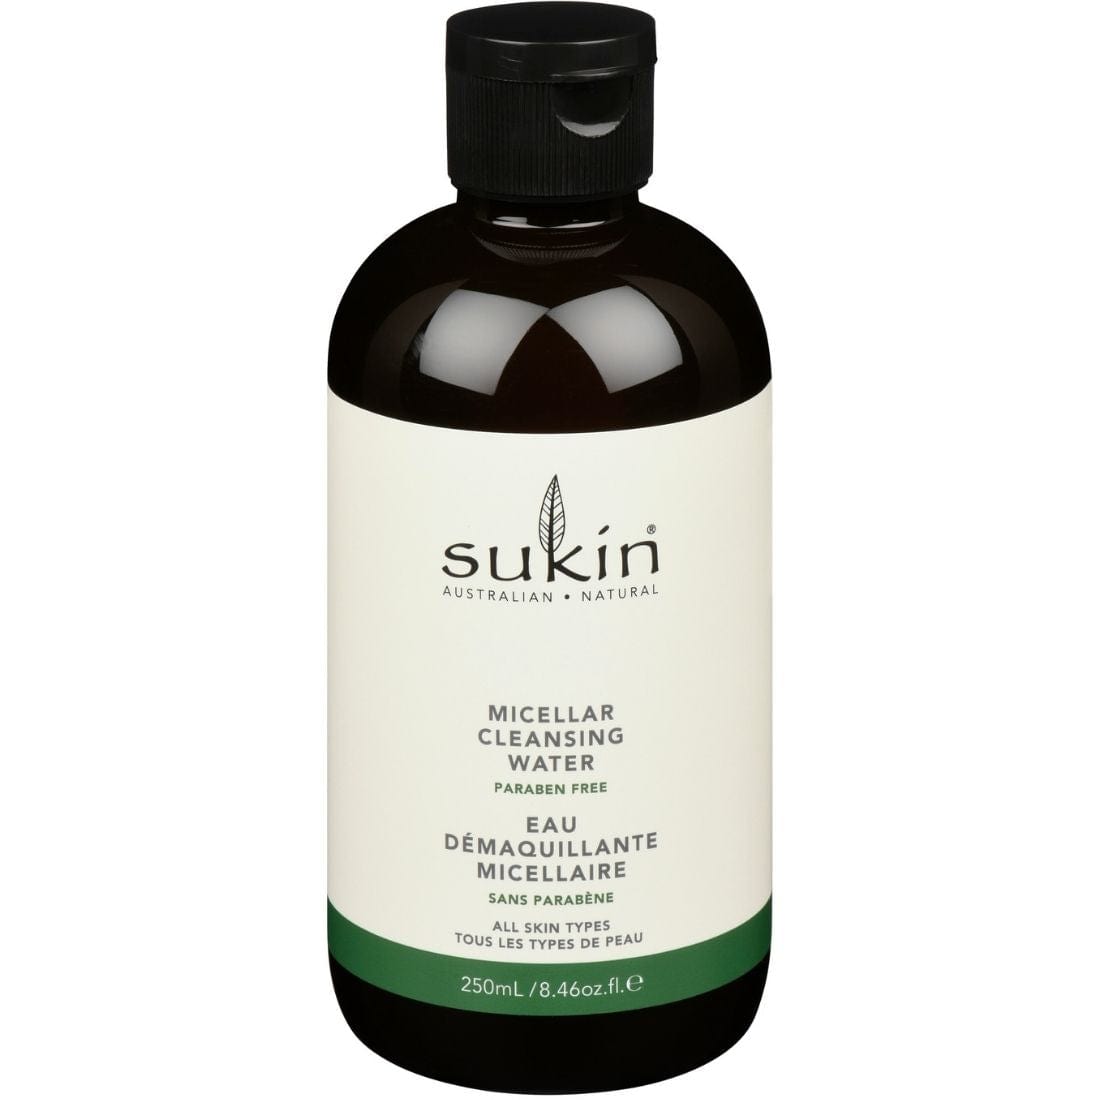 Sukin Micellar Cleansing Water | Signature, 250 ml, Clearance 40% Off, Final Sale